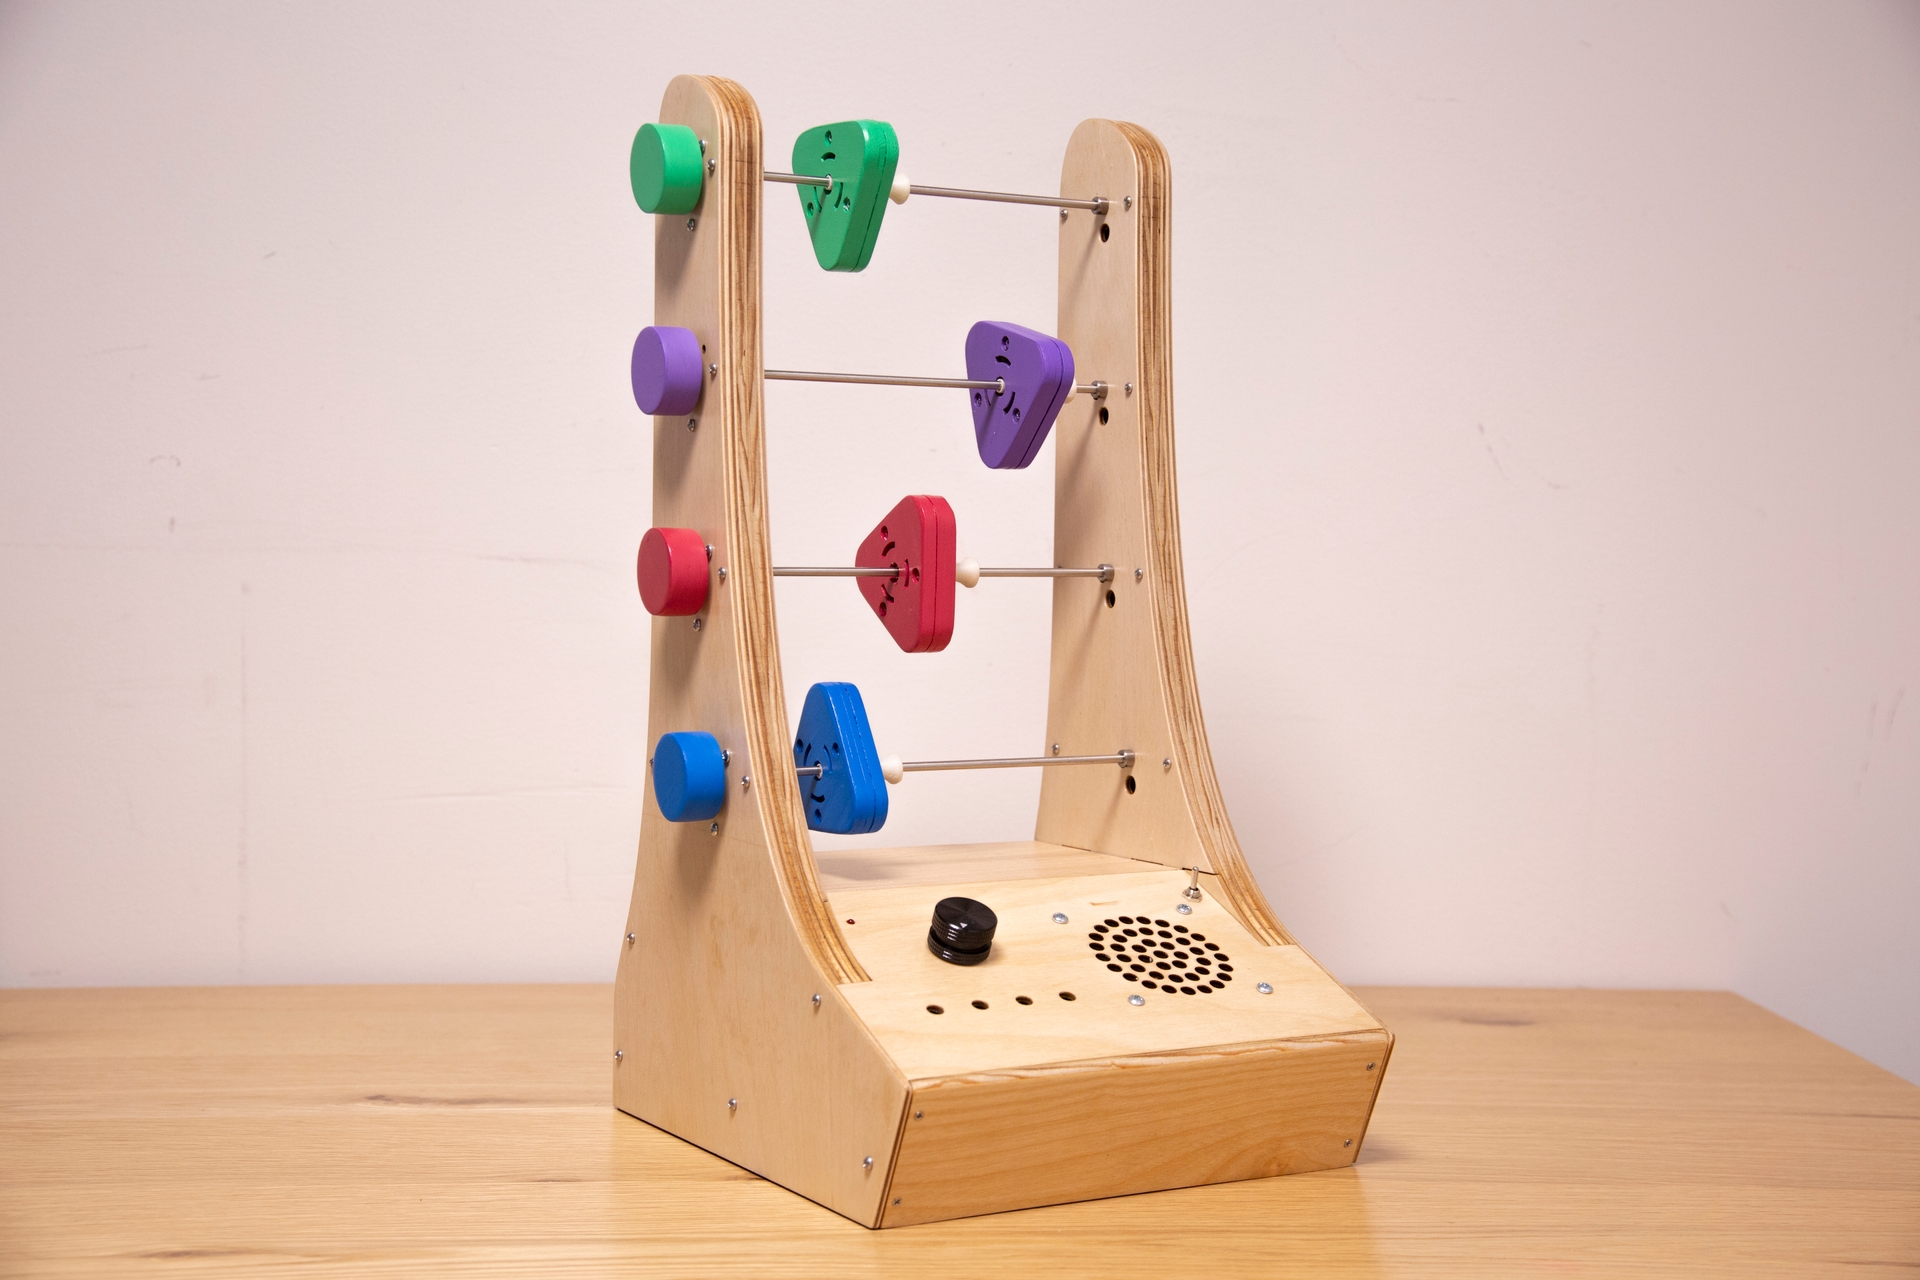 Front view of Abacusynth: a wooden device holding four rods vertically. Each rod has a colored triangular object that can spin and be moved side to side